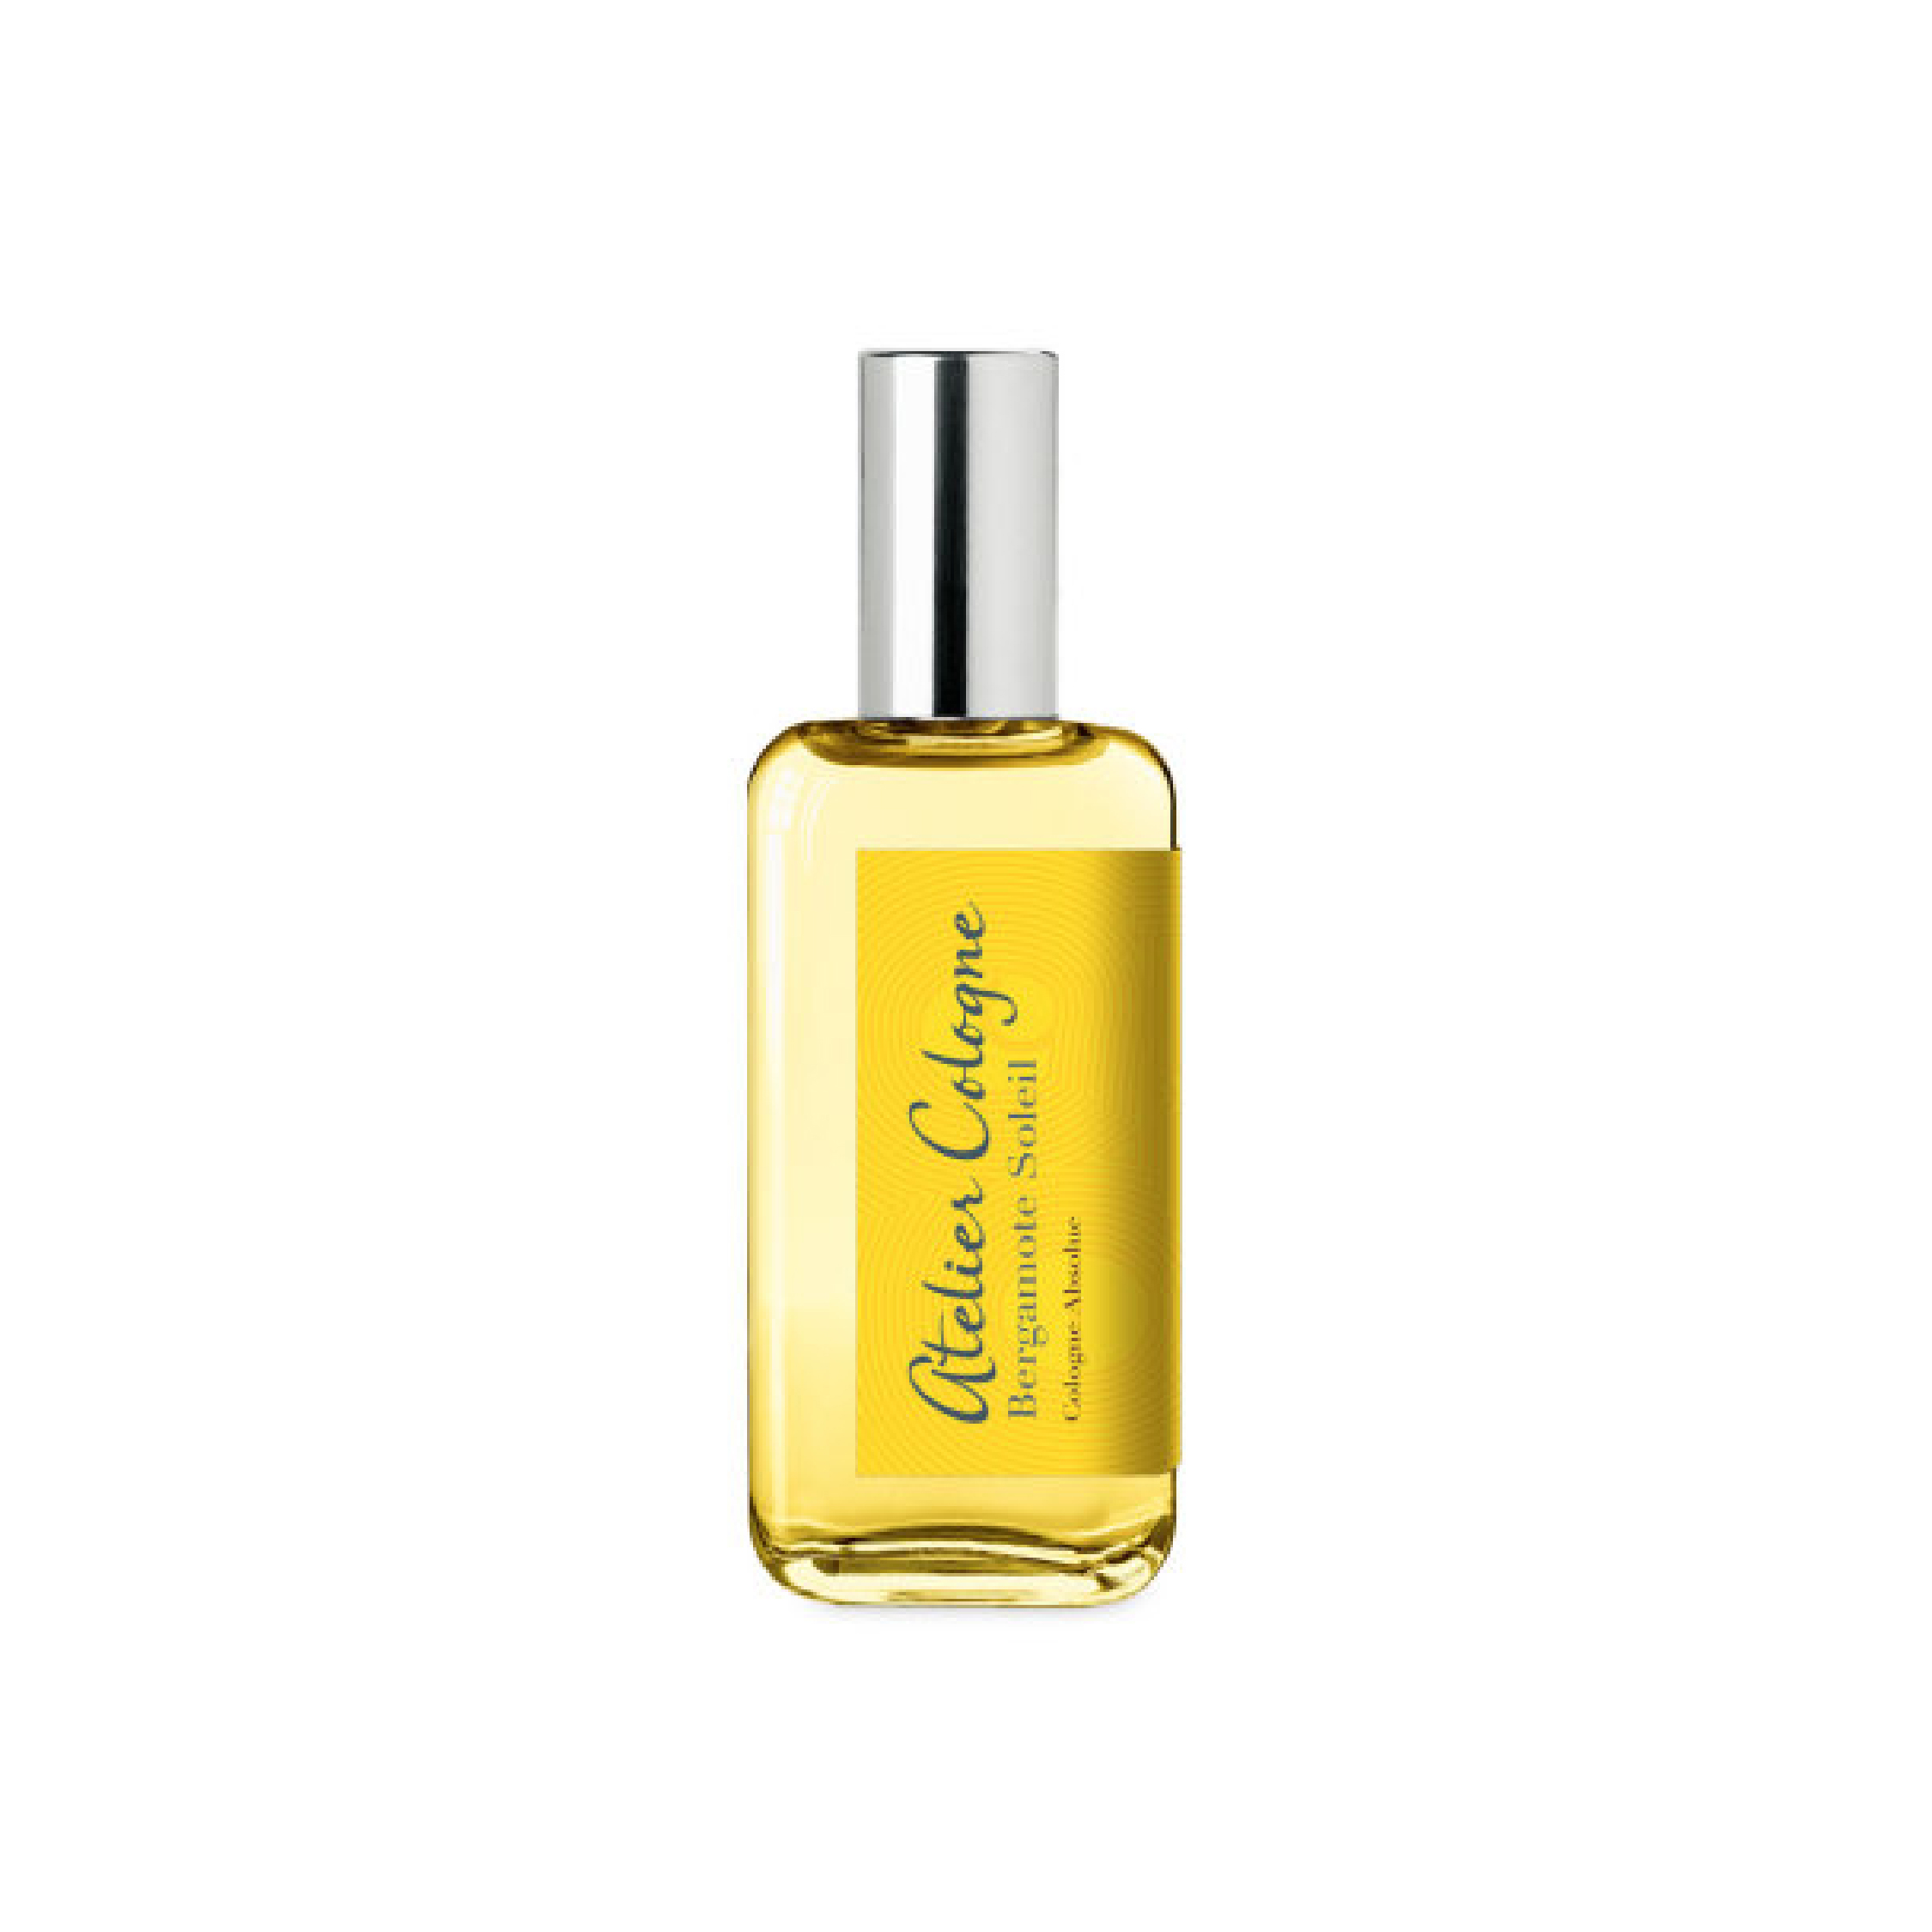 ATELIER BERGAMOTE SOLEIL COLOGNE ABSOLUE 30ML